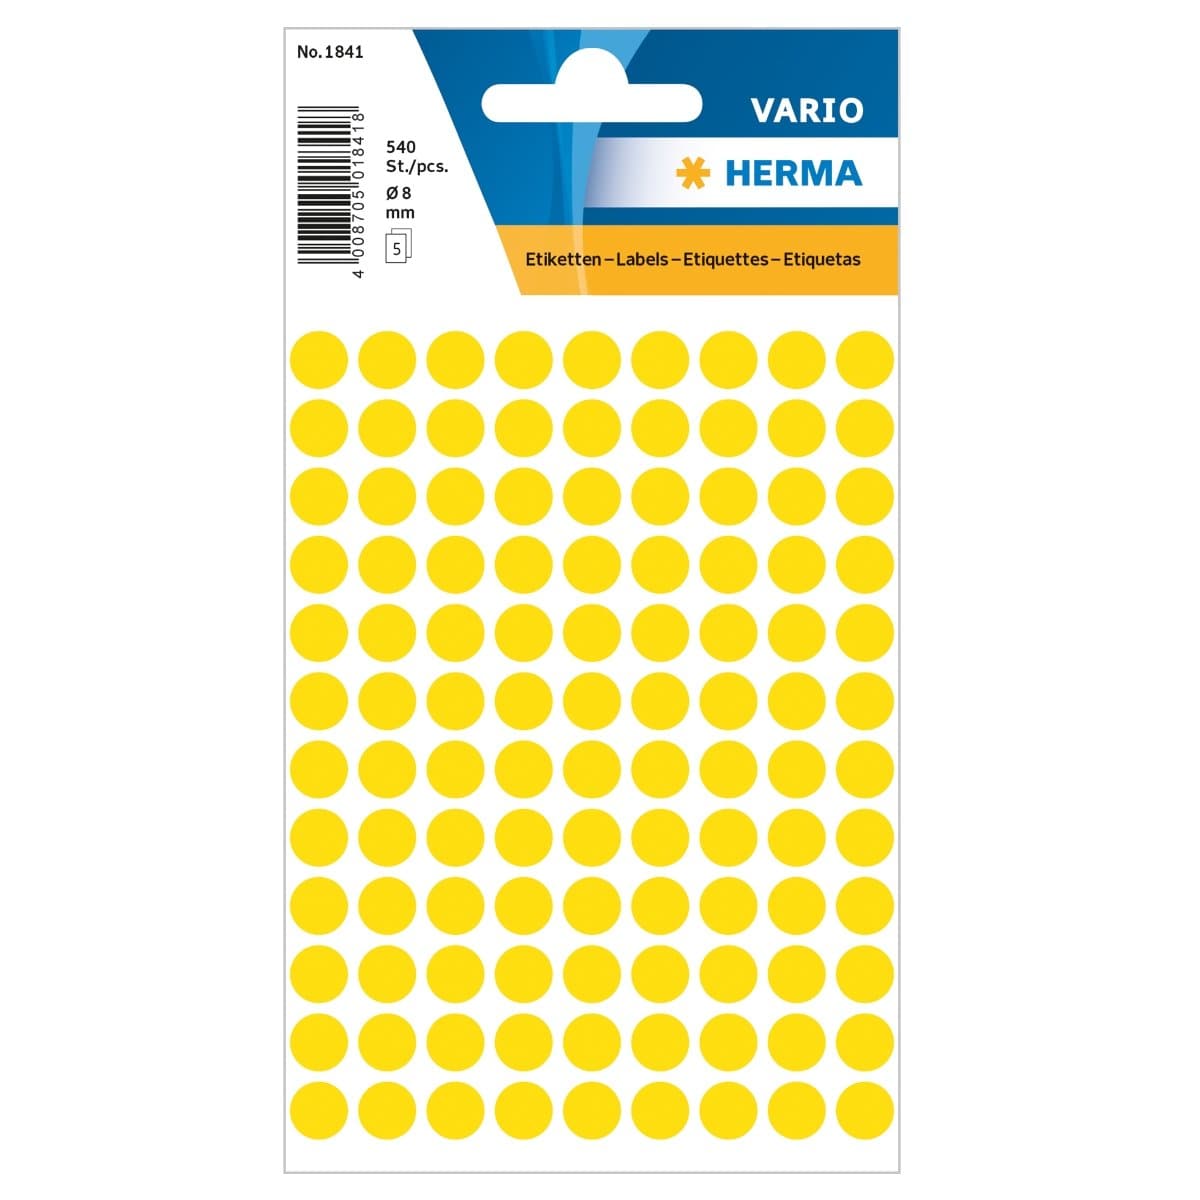 Herma Vario Sticker Color Dots, 8 mm, 540/pack, Yellow